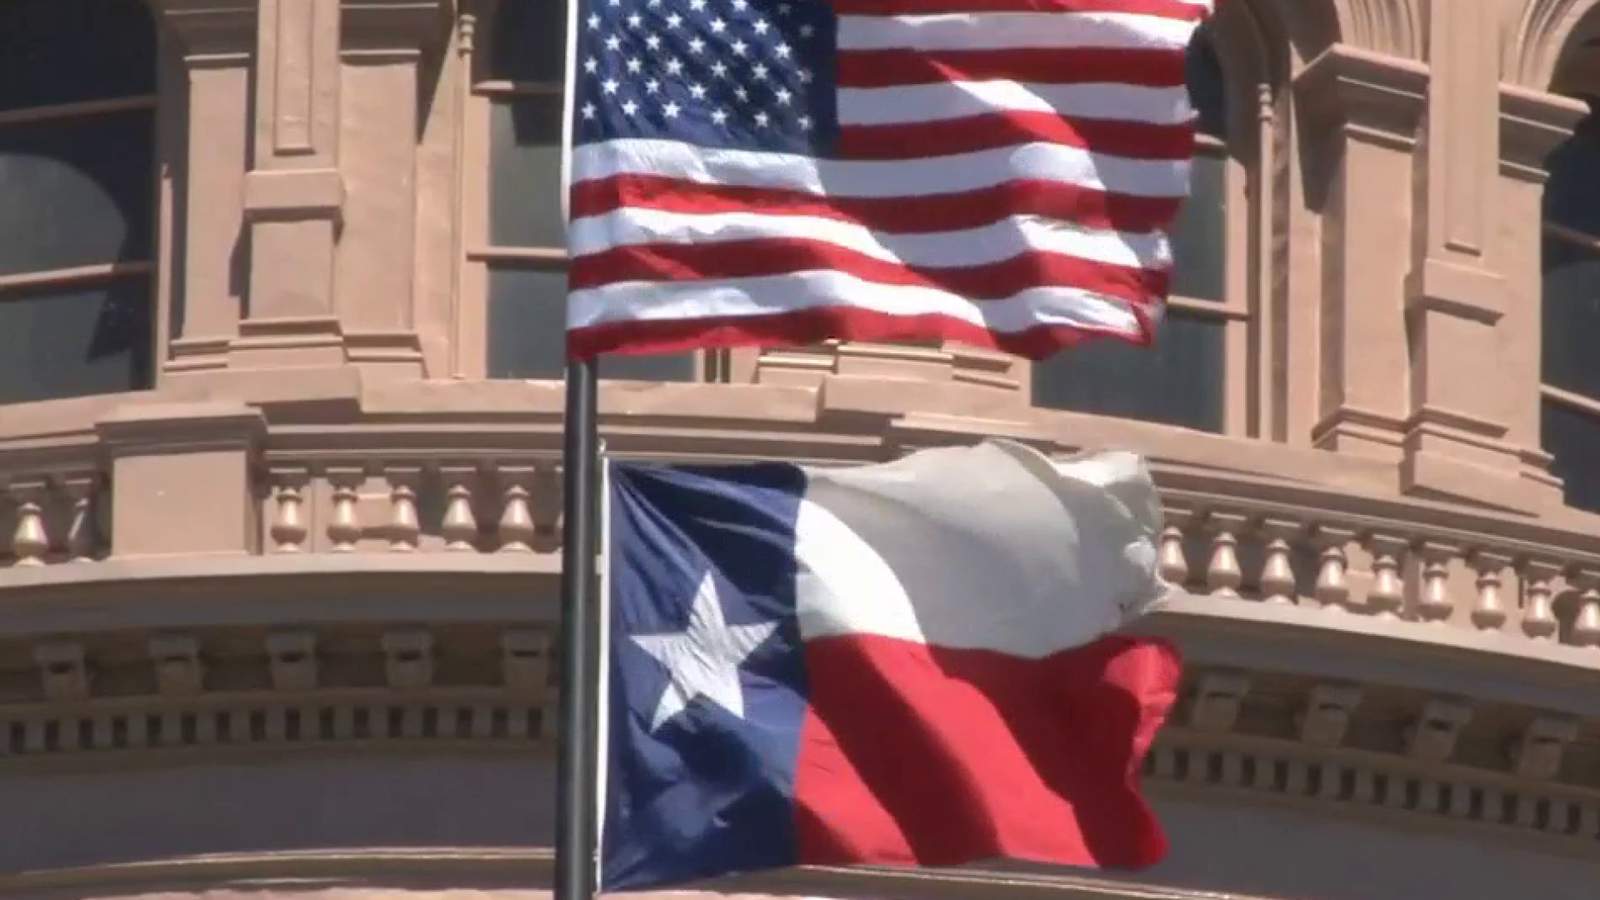 Upcoming Texas Legislature expected to tackle redistricting, public safety and budget issues